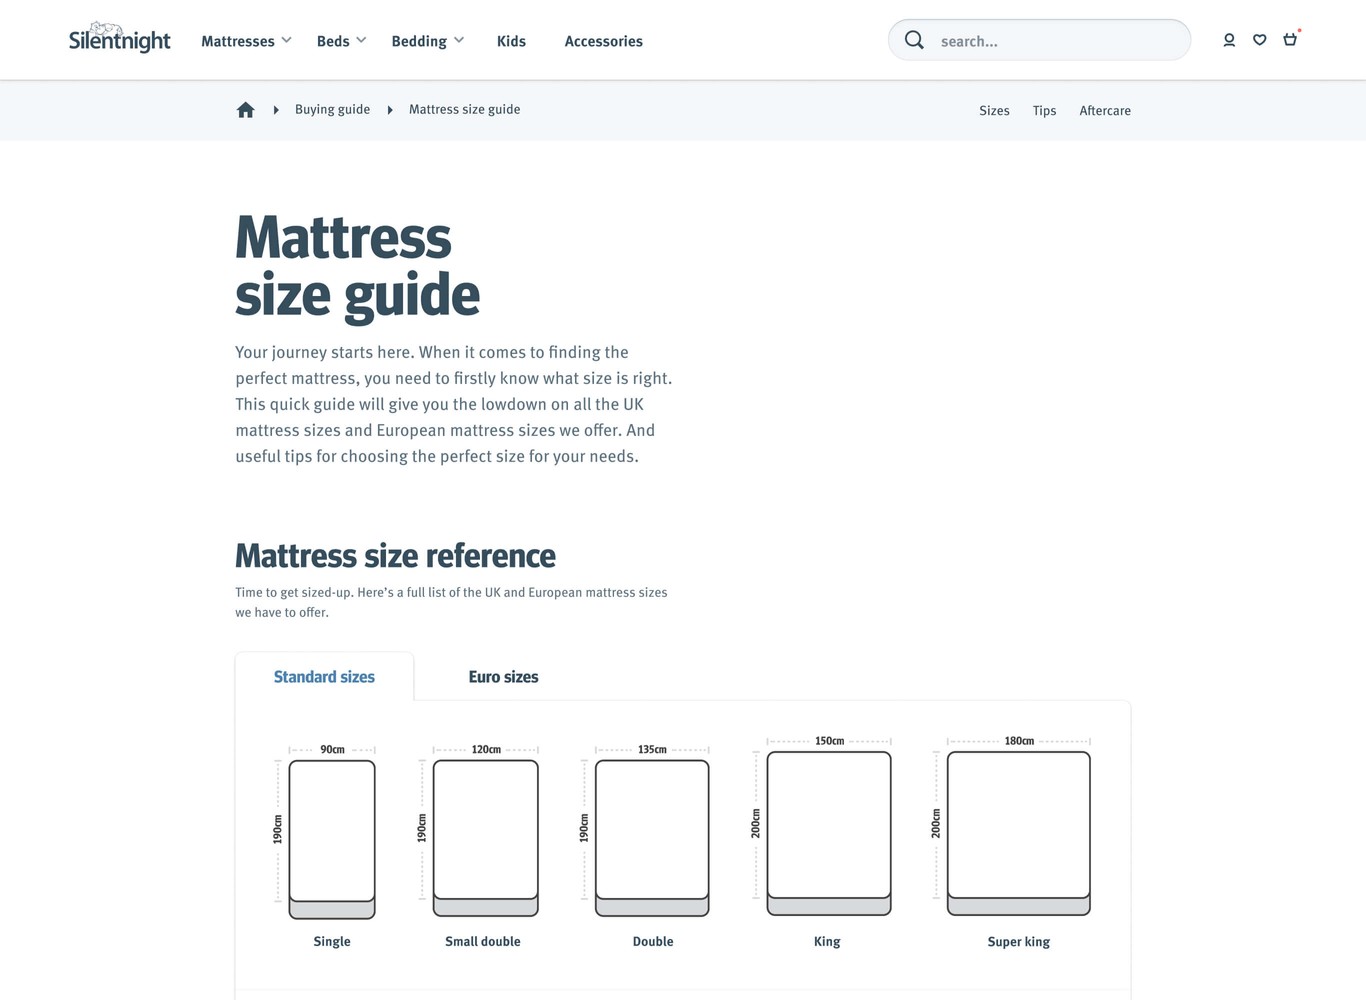 The start of the mattress size guide, which has an introduction and overview of all UK mattress sizes. From single through to king size.